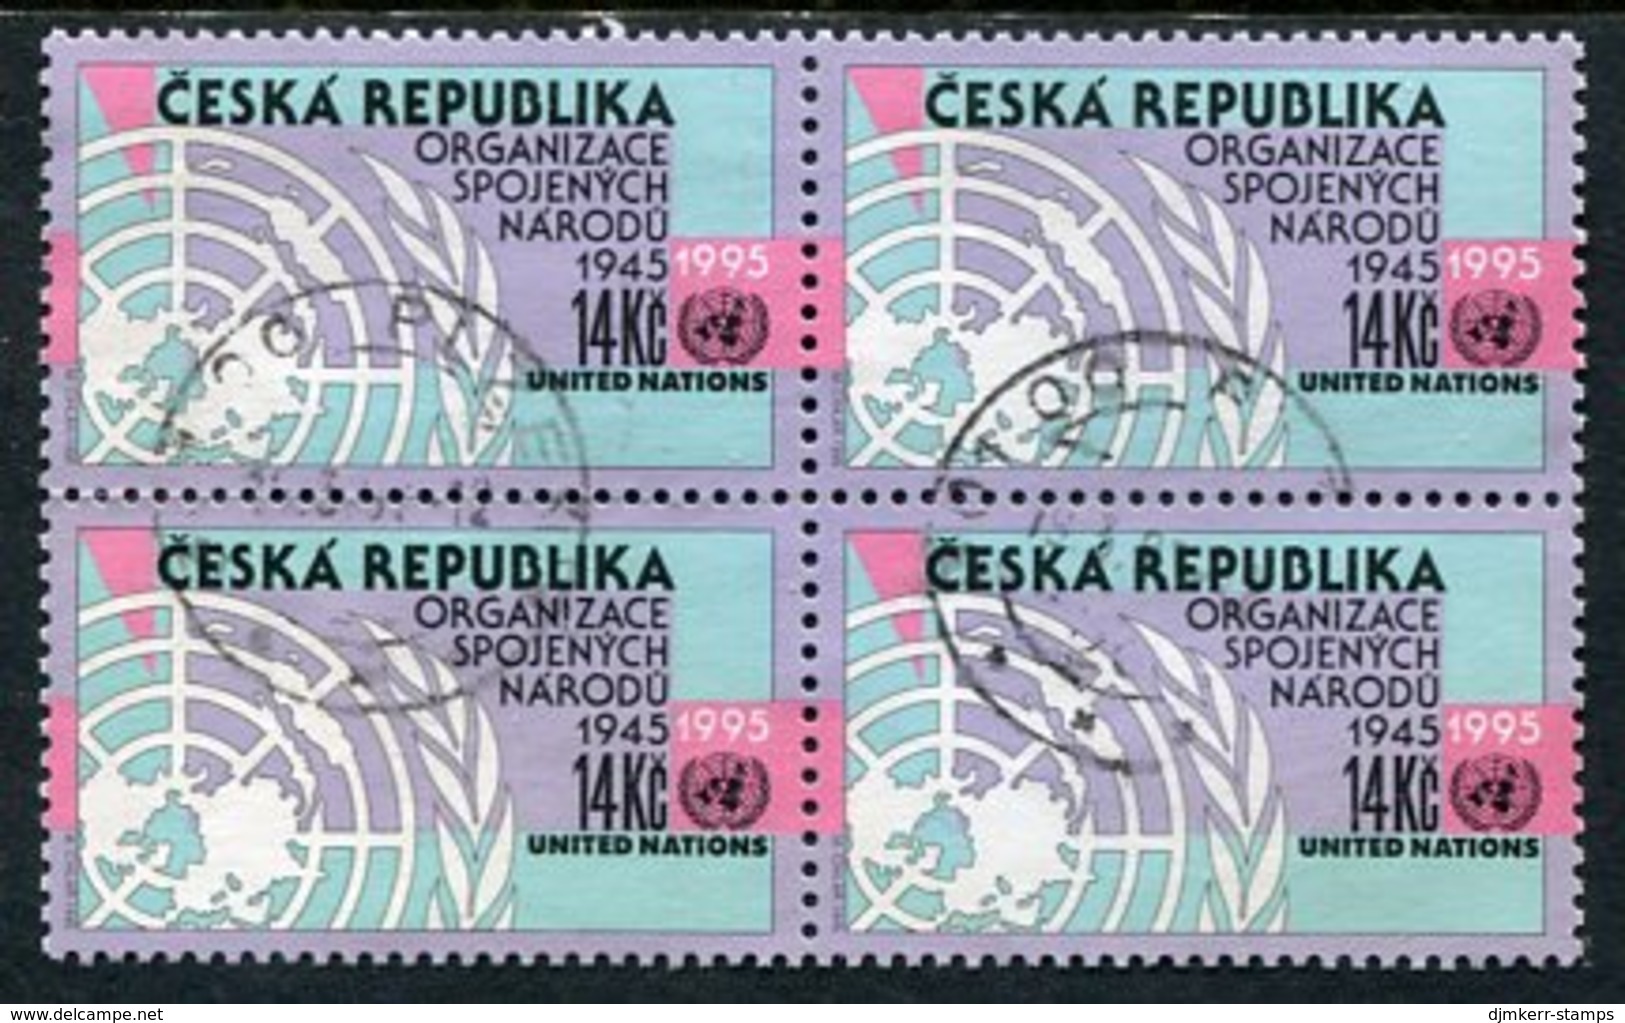 CZECH REPUBLIC 1995 UNO 50th Anniversary Used Block Of 4.  Michel 90 - Used Stamps